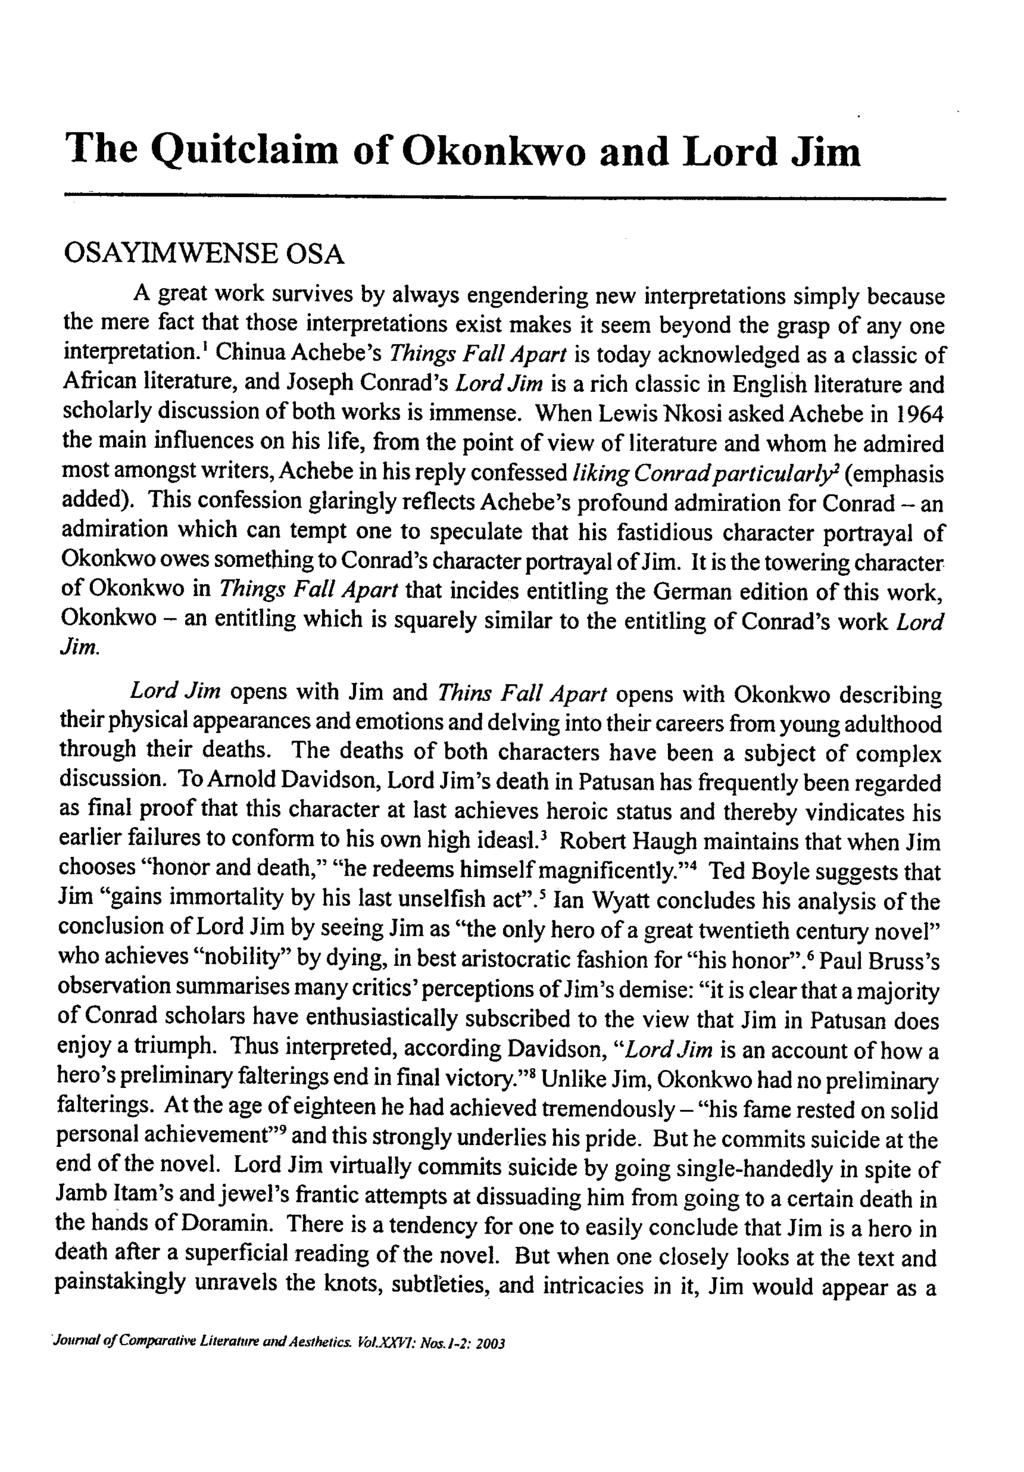 The Quitclaim of Okonkwo and Lord Jim OSAYIMWENSE OSA A great work survives by always engendering new interpretations simply because the mere fact that those interpretations exist makes it seem